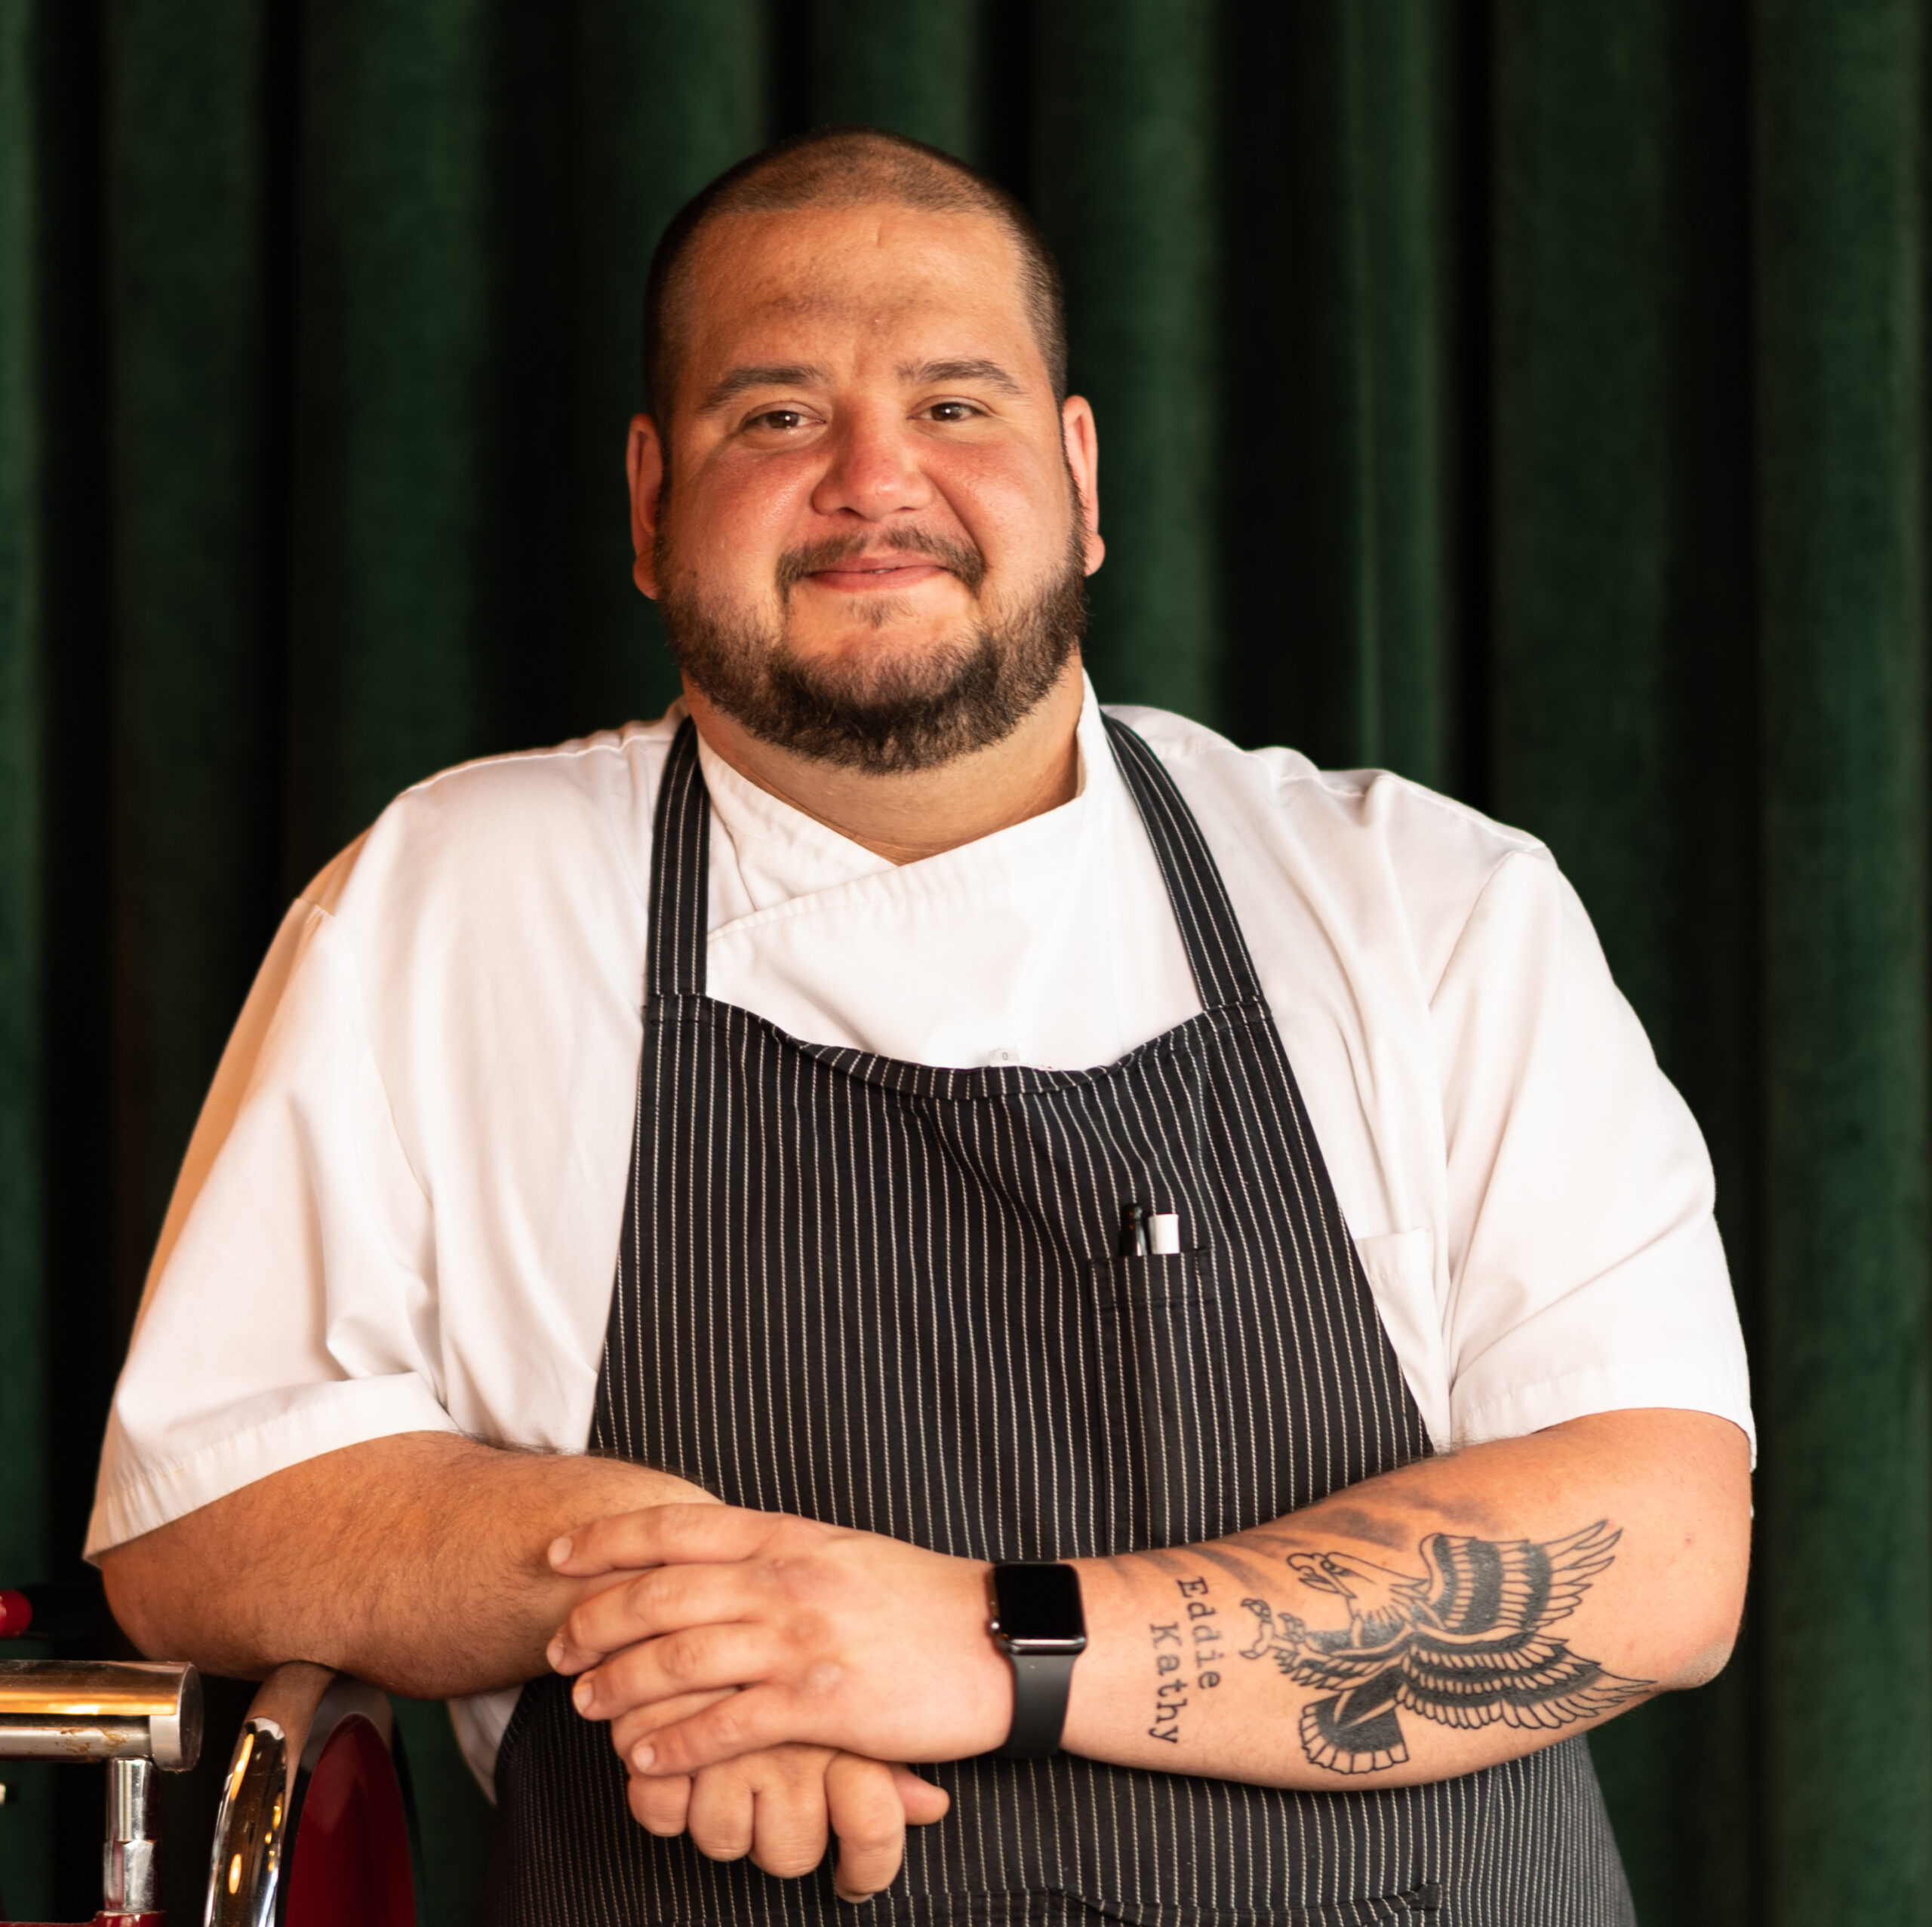 chef in an apron leaning in a headshot